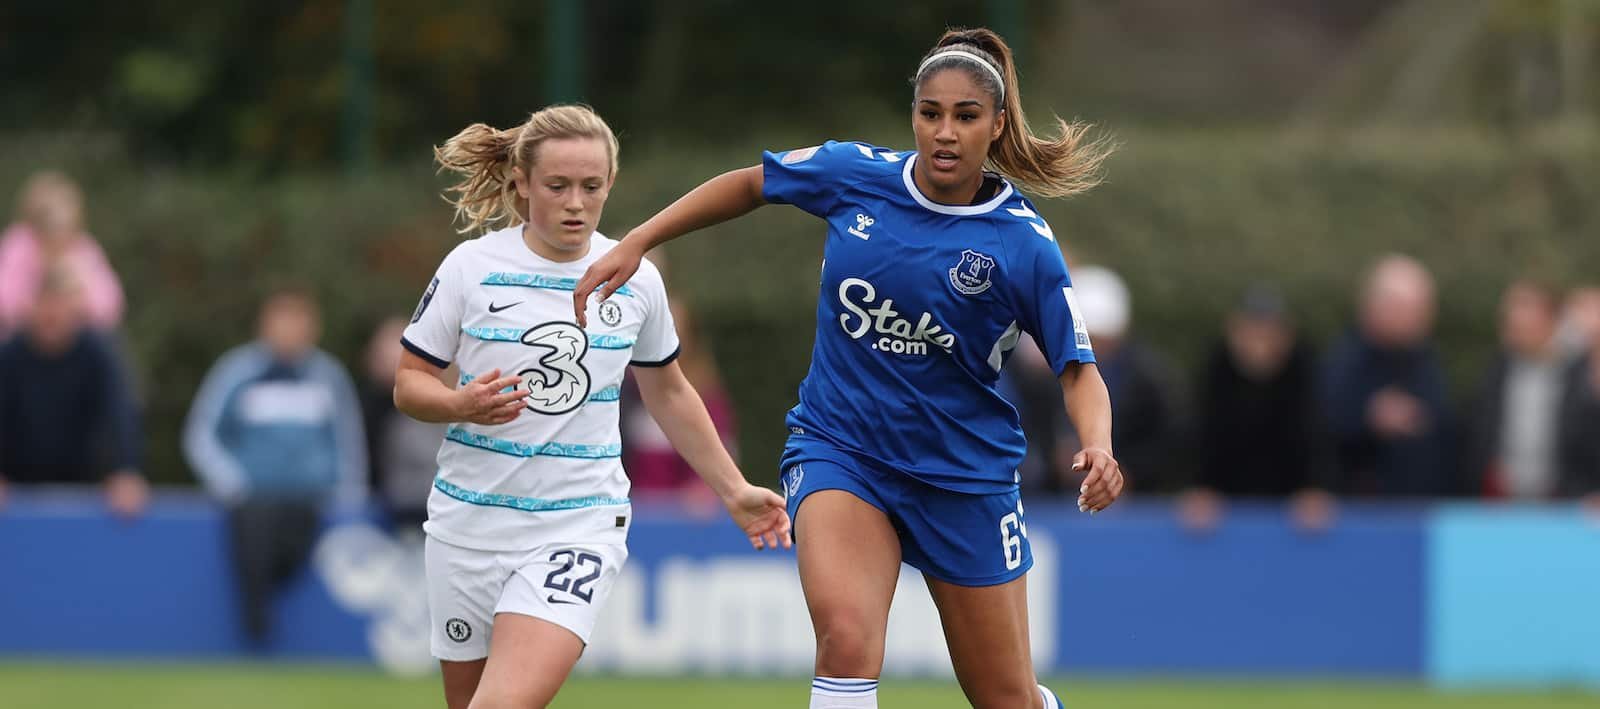 Gabby George suffers ACL injury in game against Leicester City Women – Man United News And Transfer News